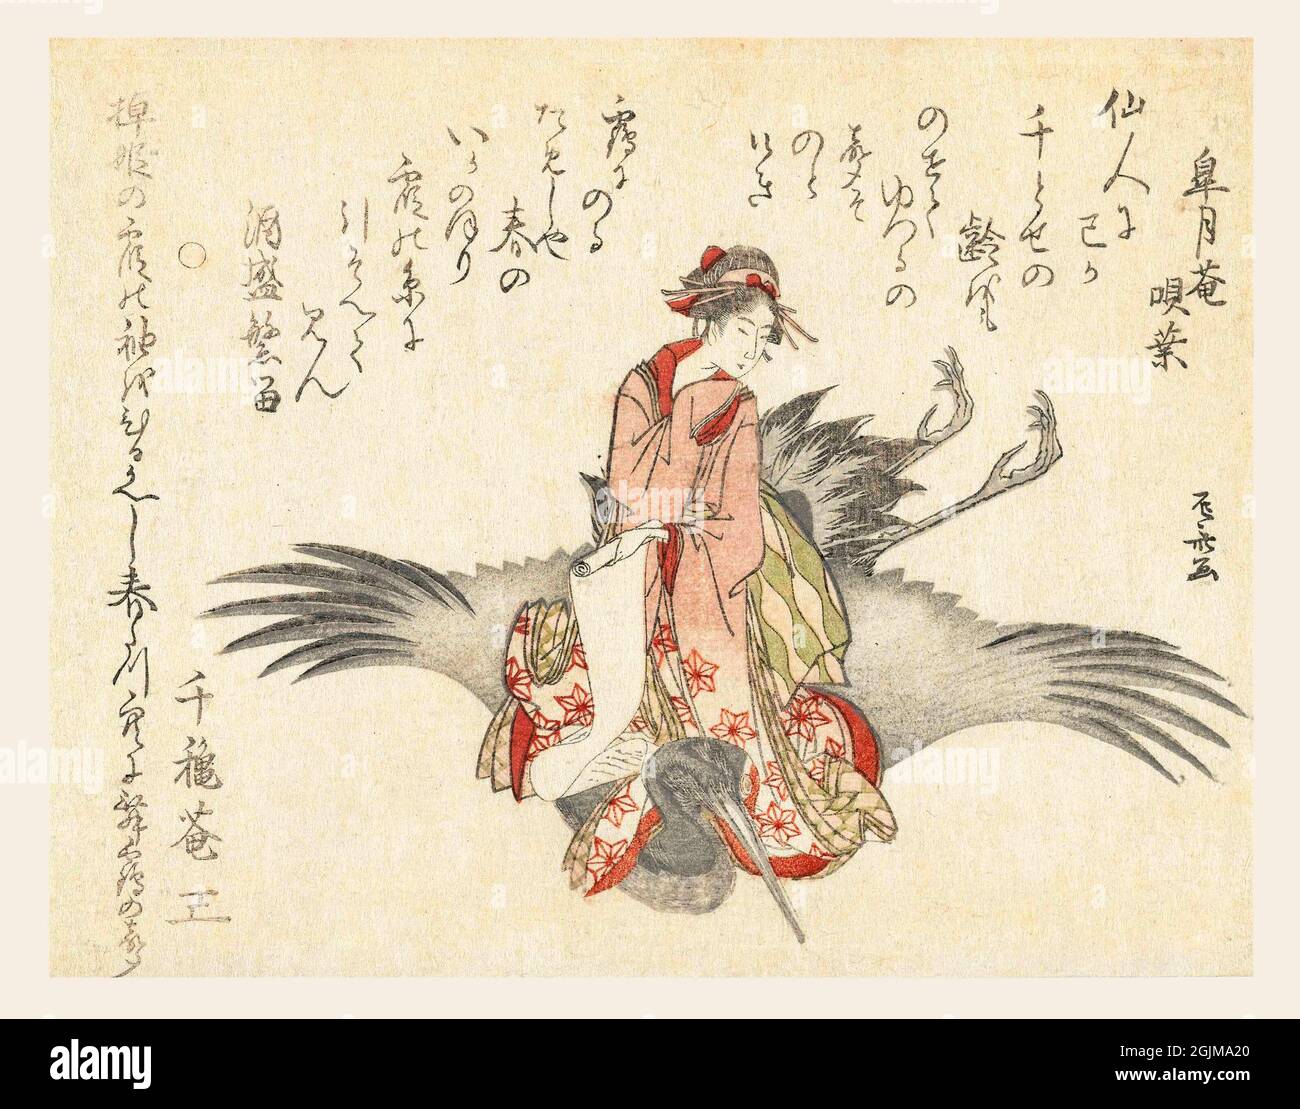 Courtesan with a long letter on a flying crane. She represents the Chinese immortal Kung Ho who is usually depicted on a crane with a book. With three poems  Digitally optimised nineteenth century Japanese woodcut illustration (1800-1805) Stock Photo